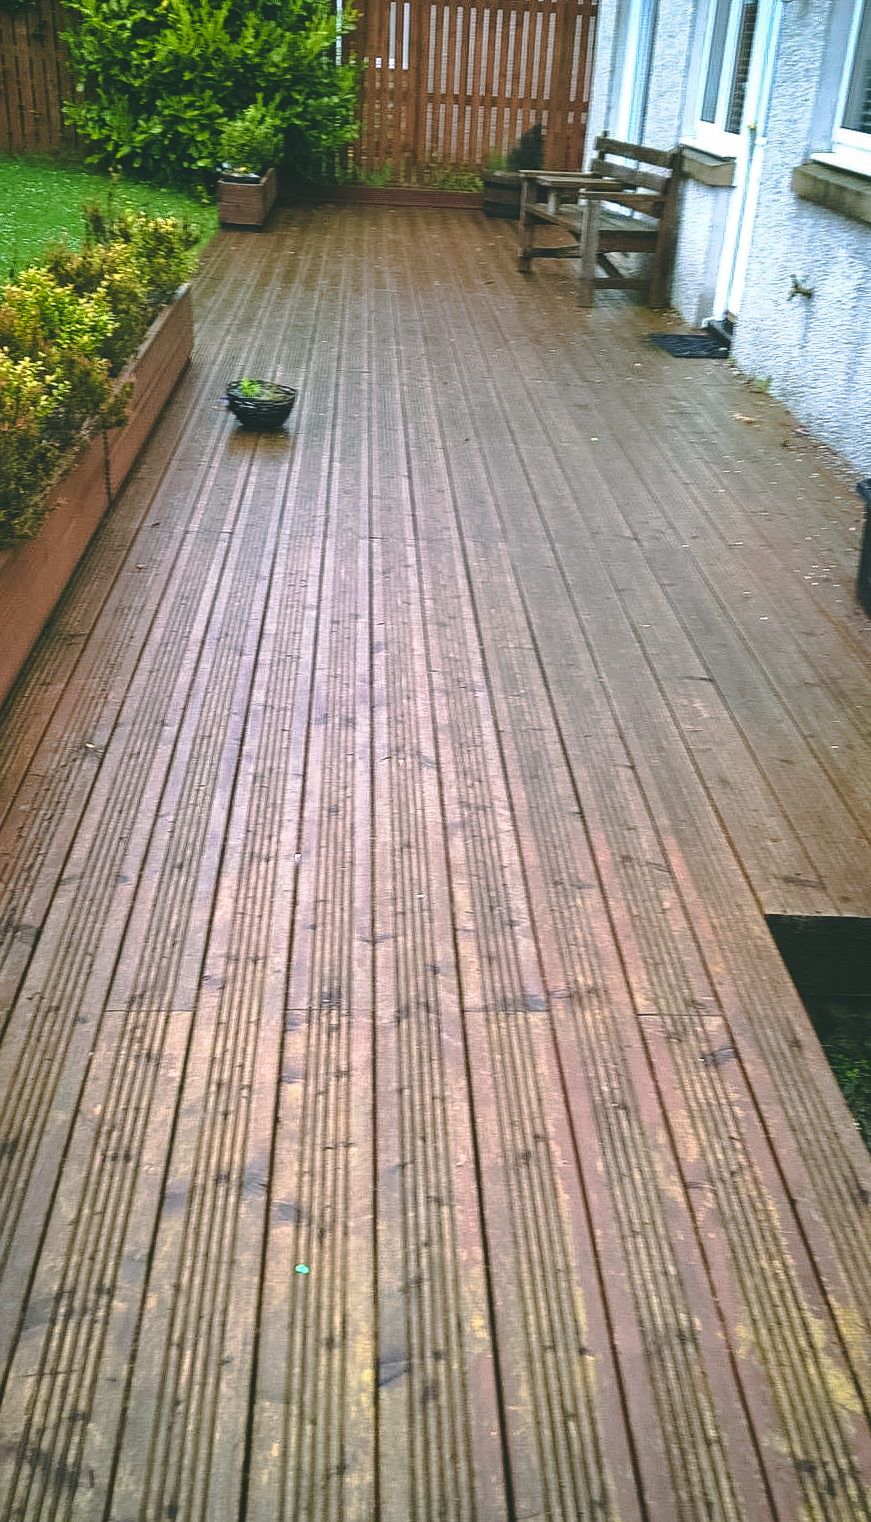 Existing decking pre-staining